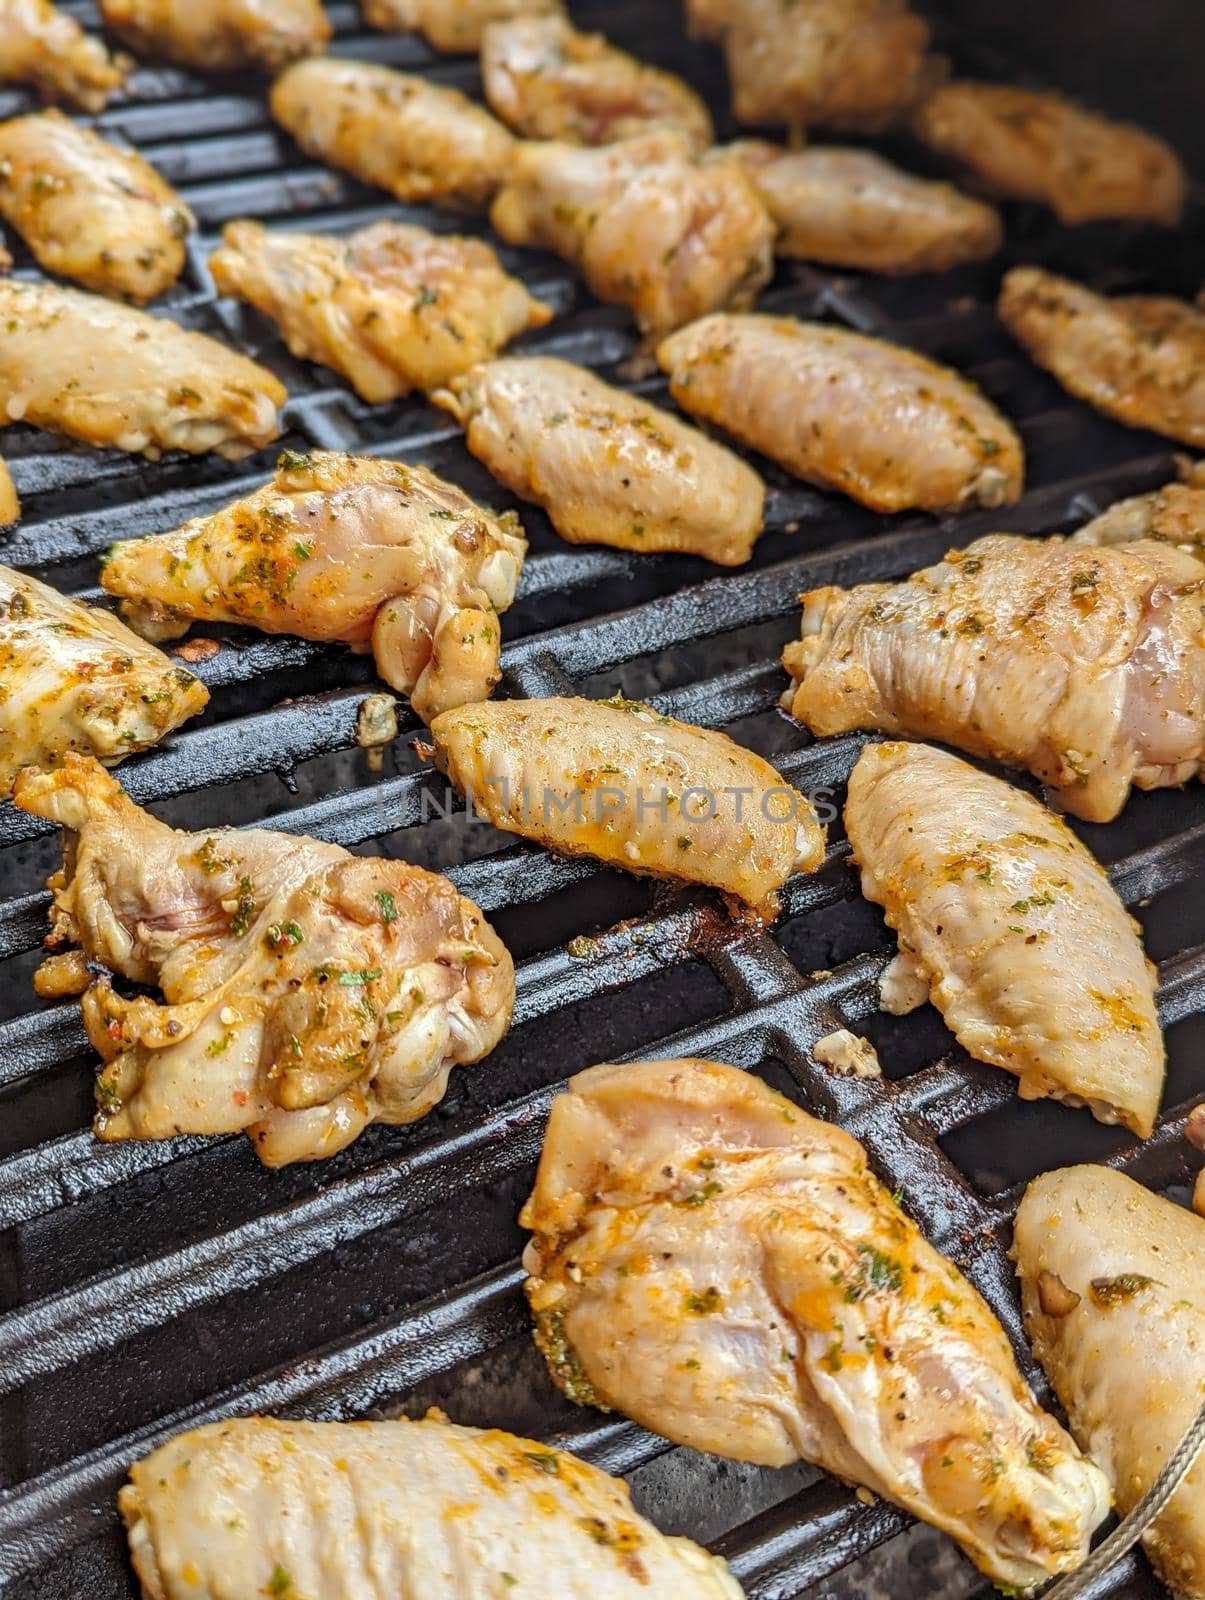 Chicken meat fried on a barbecue grill by digidreamgrafix